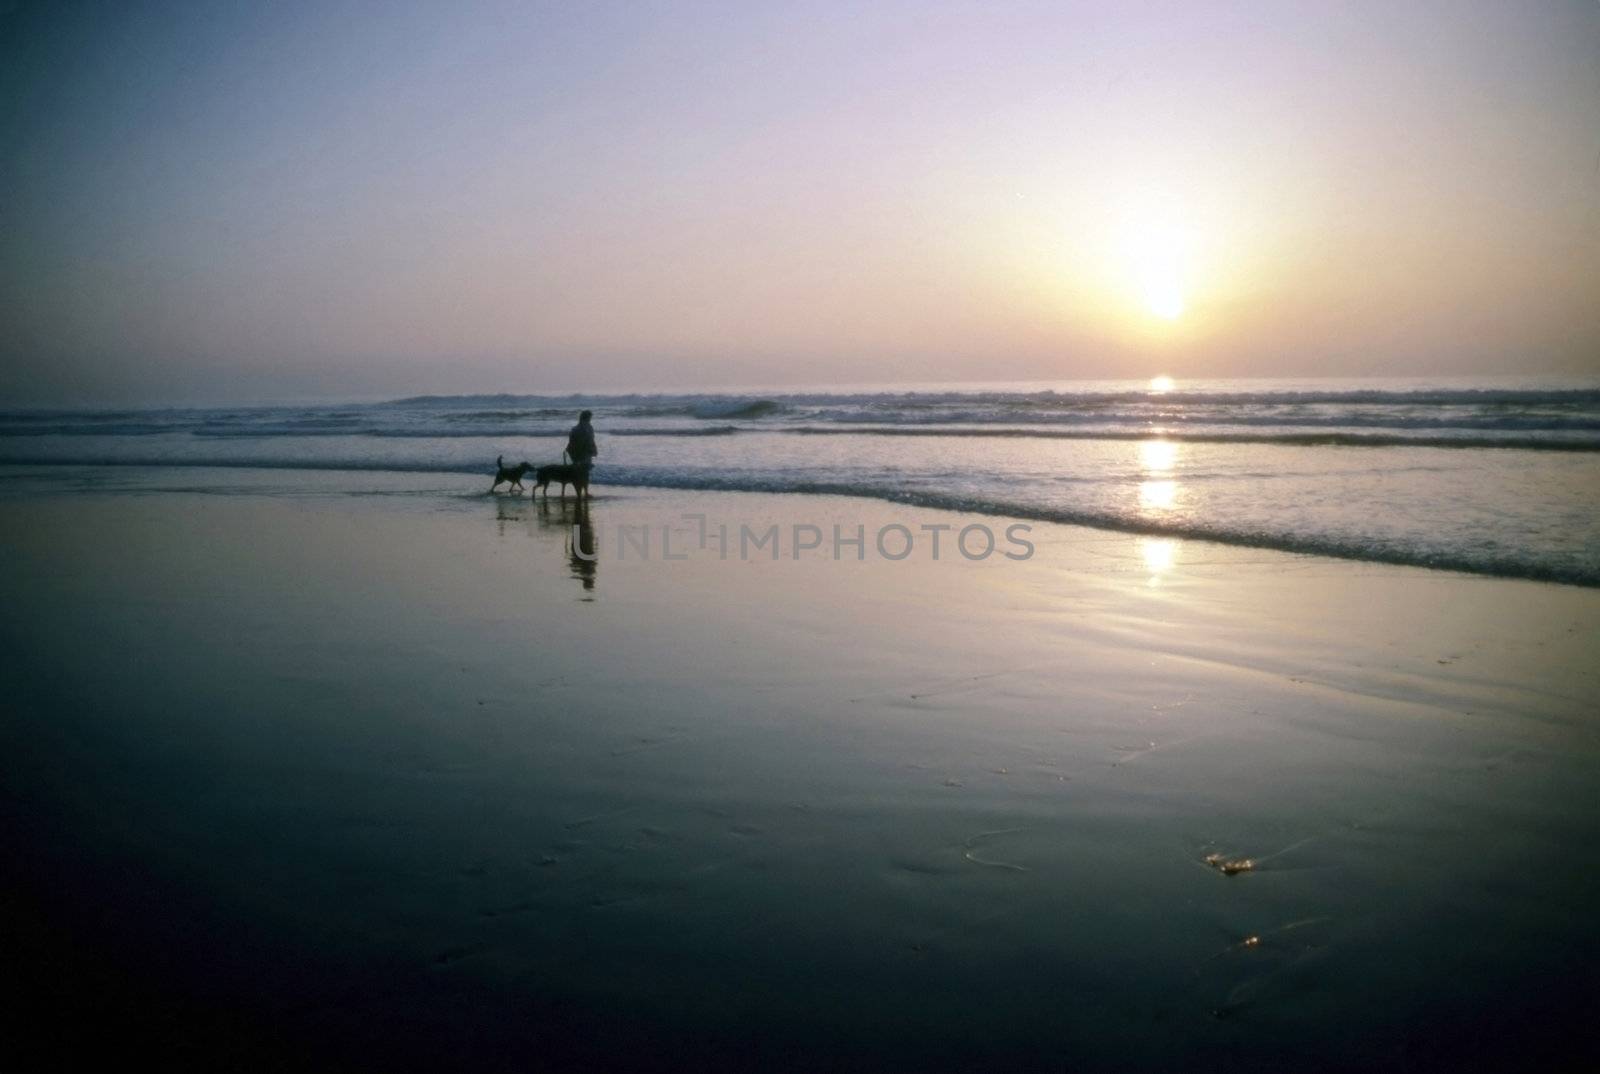 Man with dogs on beach at sunset by jol66